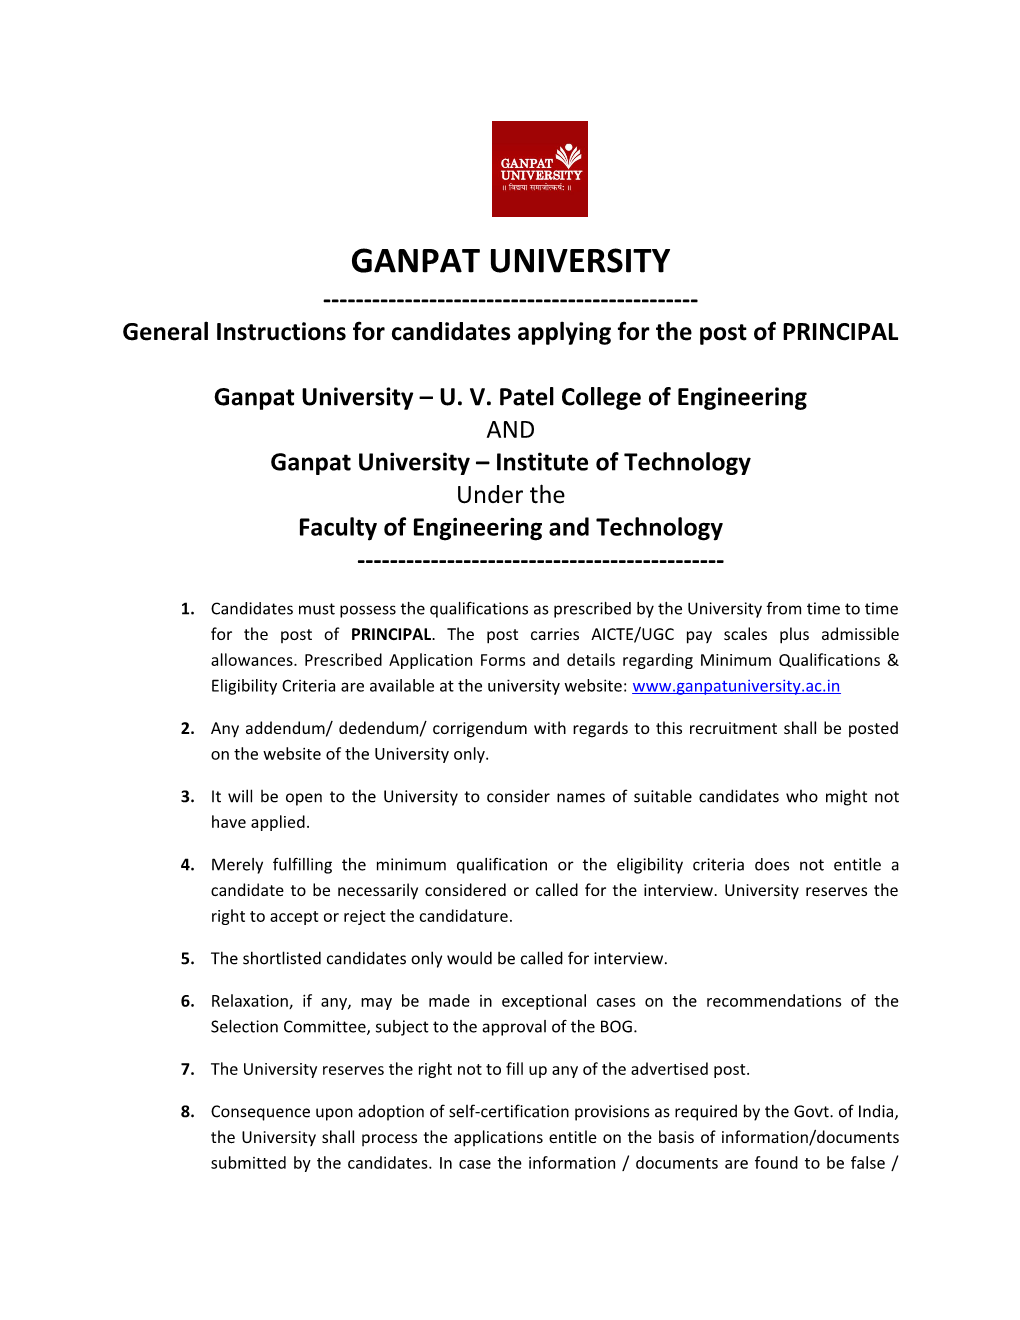 General Instructions for Candidates Applying for the Post of PRINCIPAL